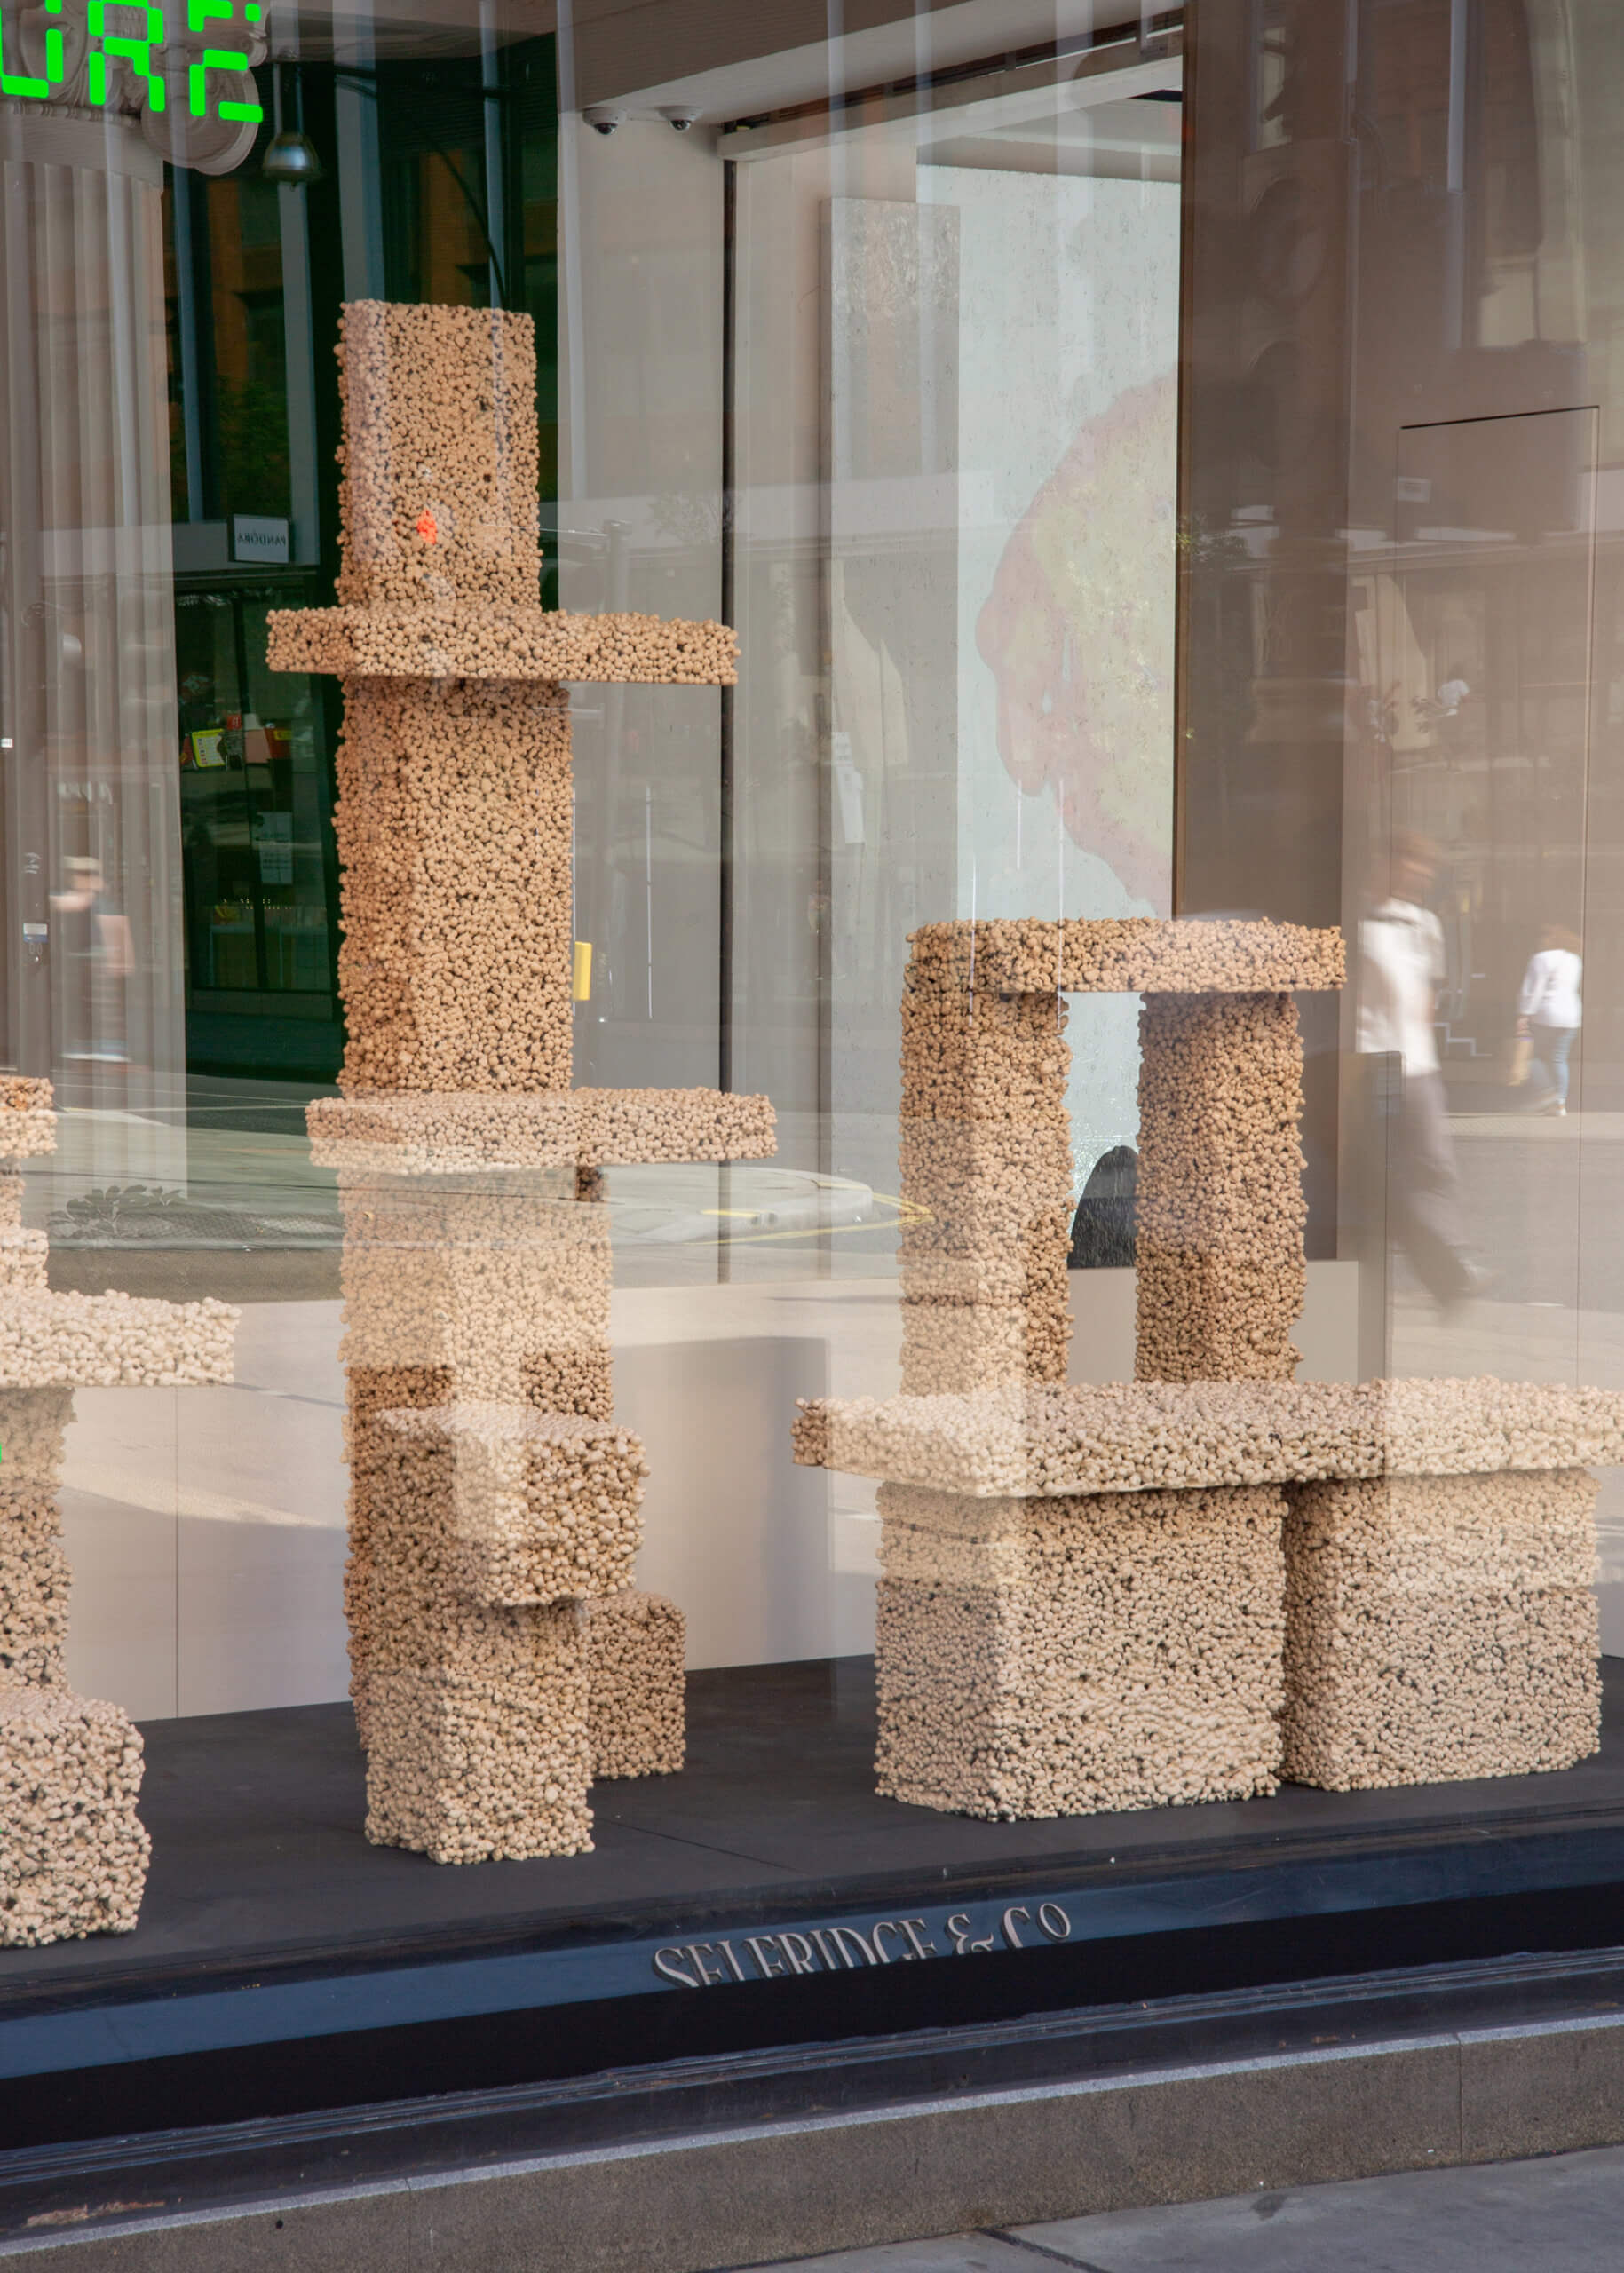 Marco Campardo,‘Reversible’ (bench, side tables, console, plinth, bookshelf), various sizes, expanded clay, sugar, 2022. Shop window installation created for 'Visions for the Future’ (SUPERFUTURES). Commissioned by Selfridges.